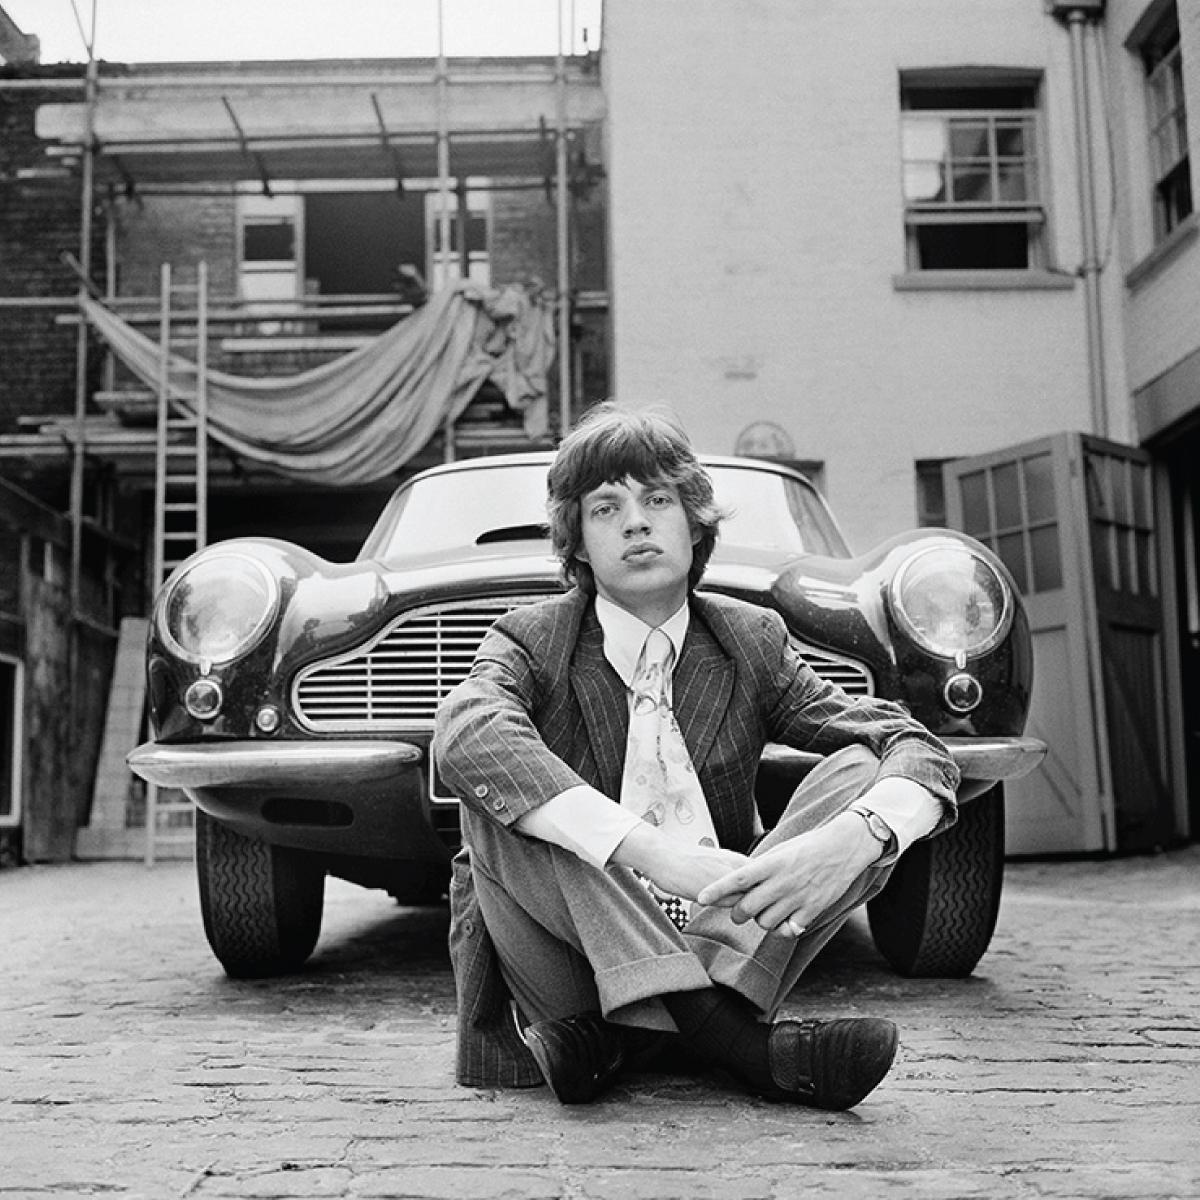 Mick Jagger of the Rolling Stones with his beloved Aston Martin DB6, taken outside his London apartment in 1966 by Gered Mankowitz.

"I shot a series of photographs of each member of the band at home so that they didn't have to endure strange